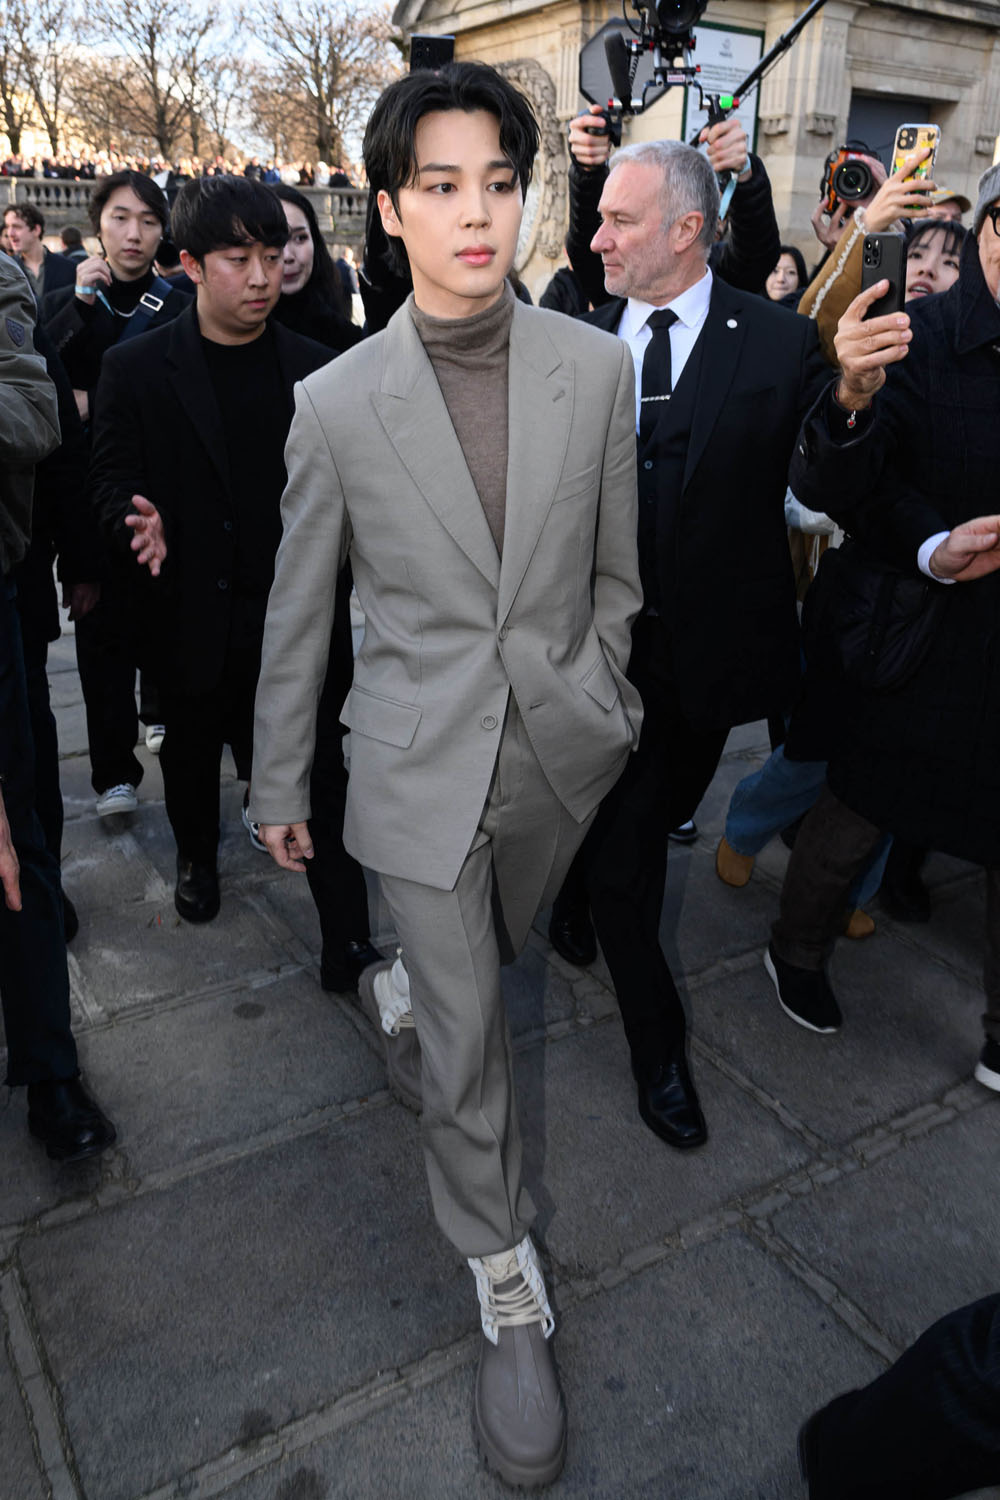 J-Hope goes bold in Louis Vuitton's camouflage look at Paris Fashion Week